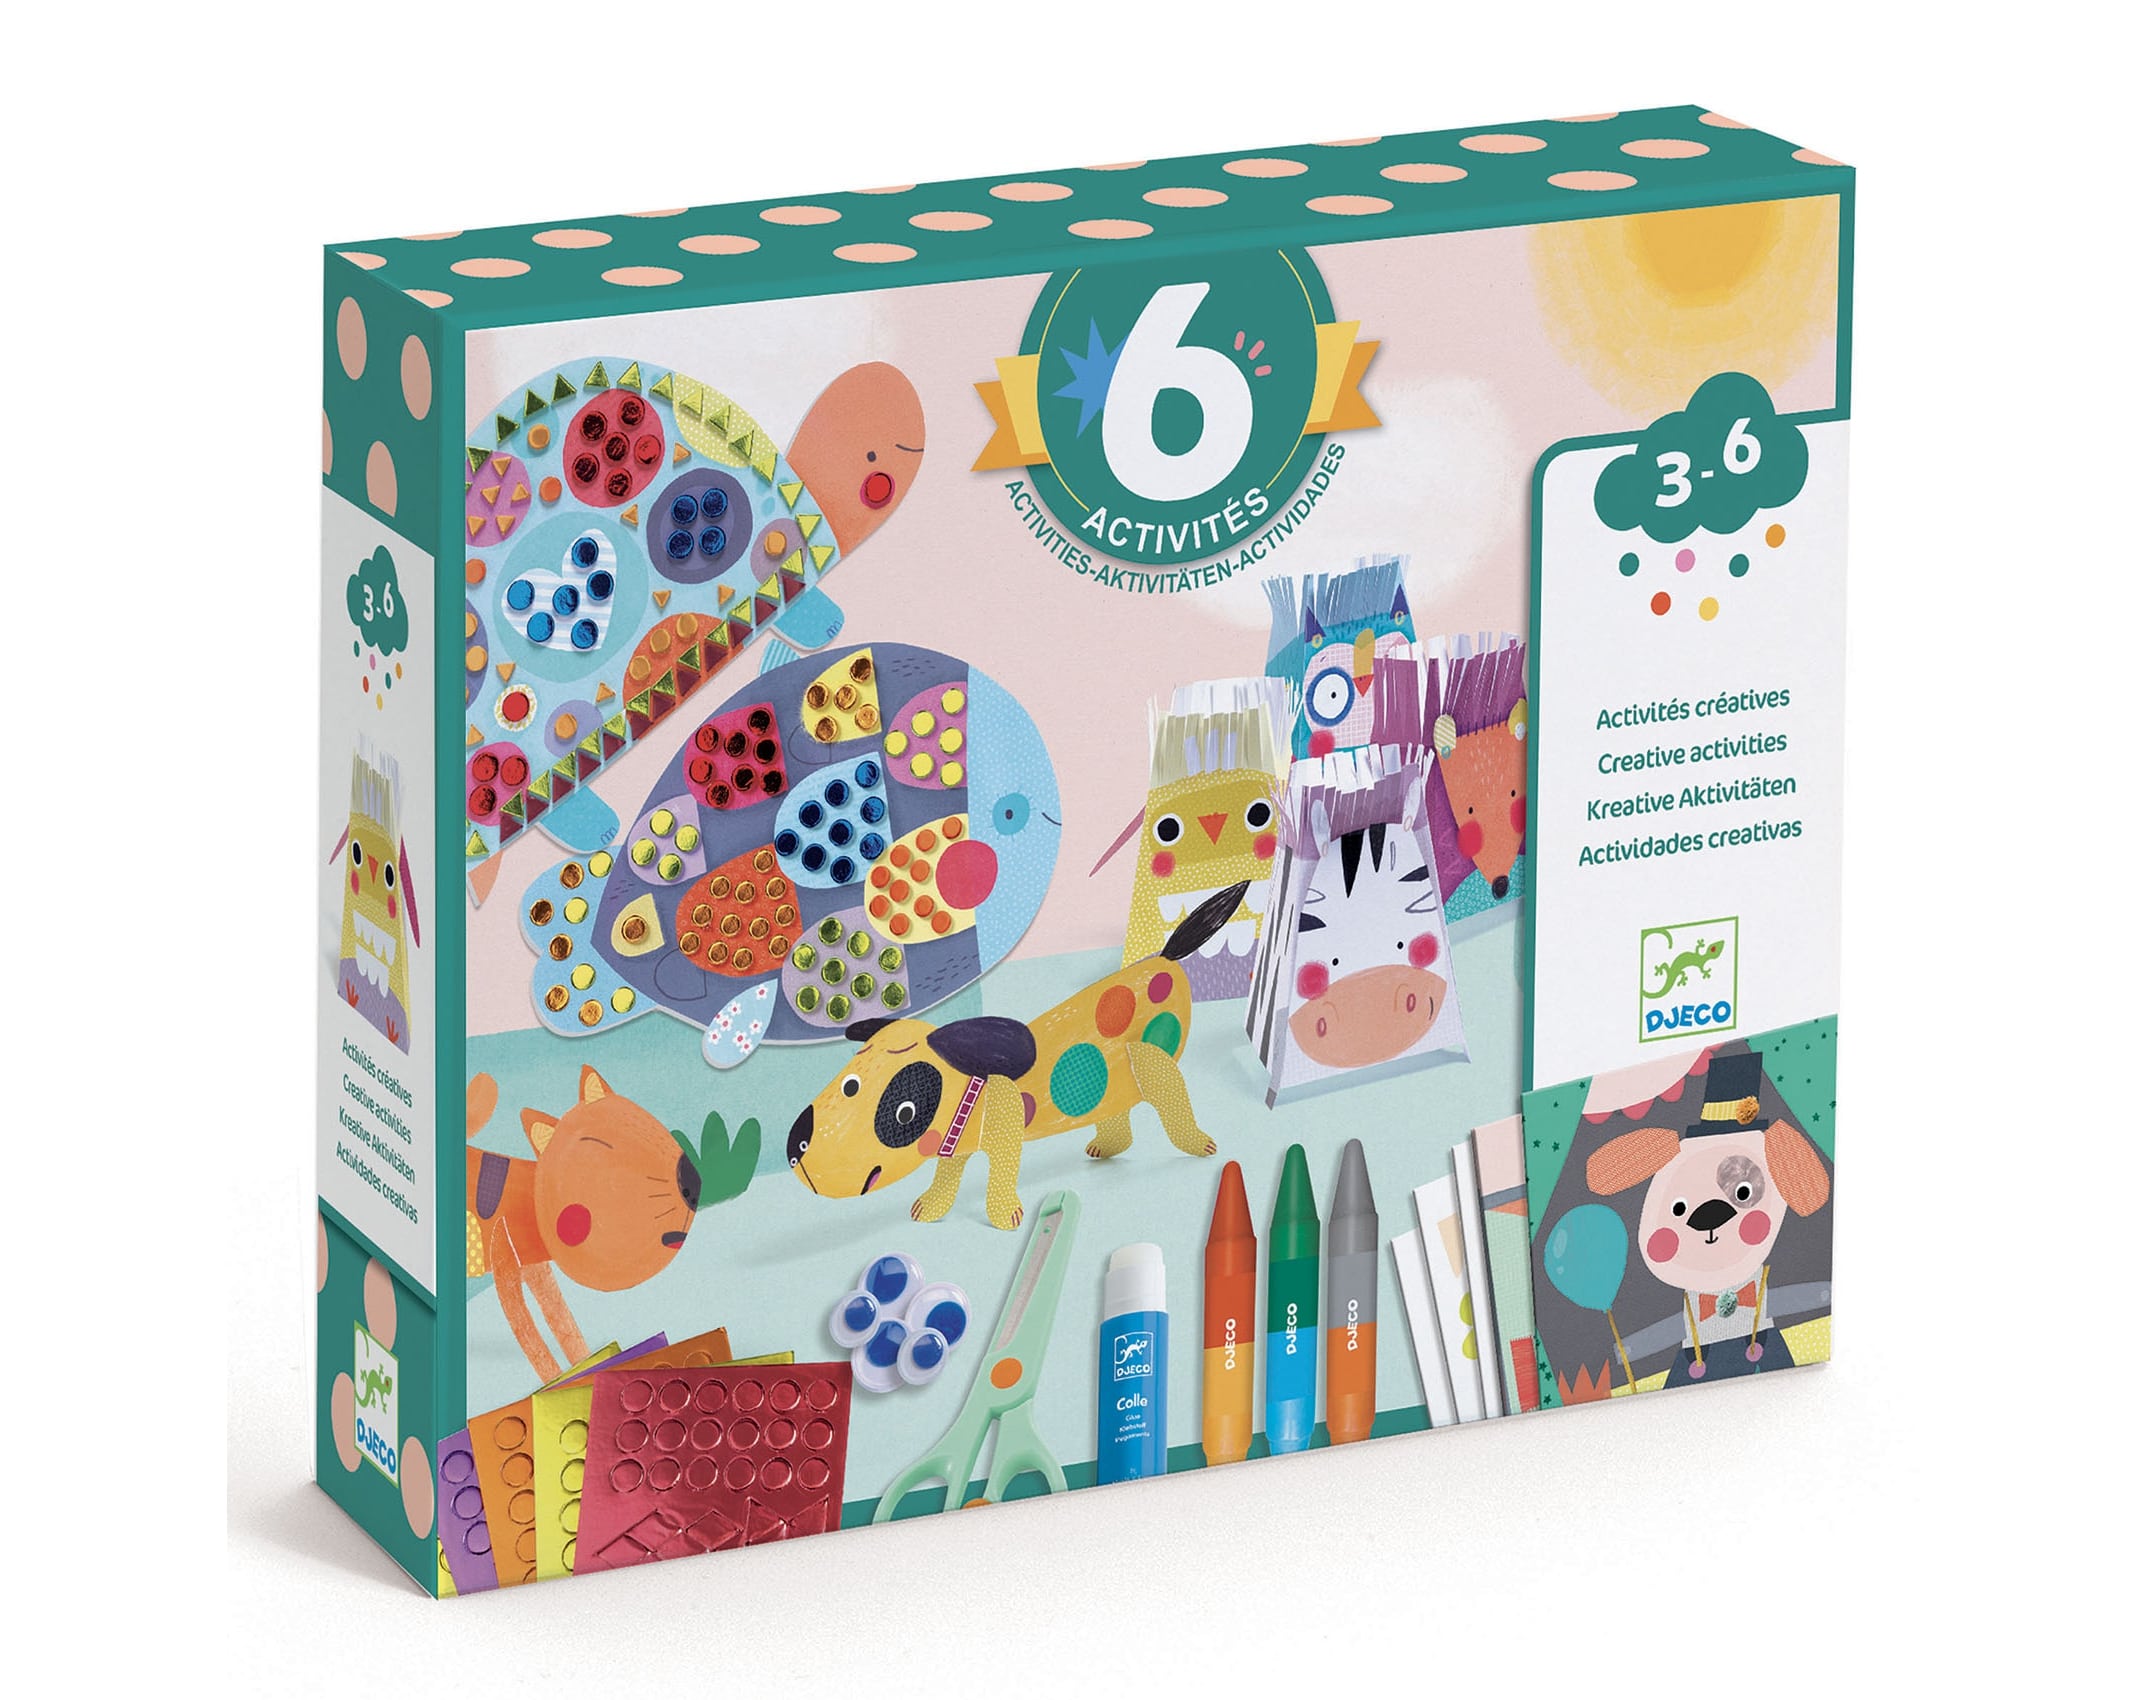 Djeco I Educational Games & Toys, Puzzles, Arts & Crafts for Kids